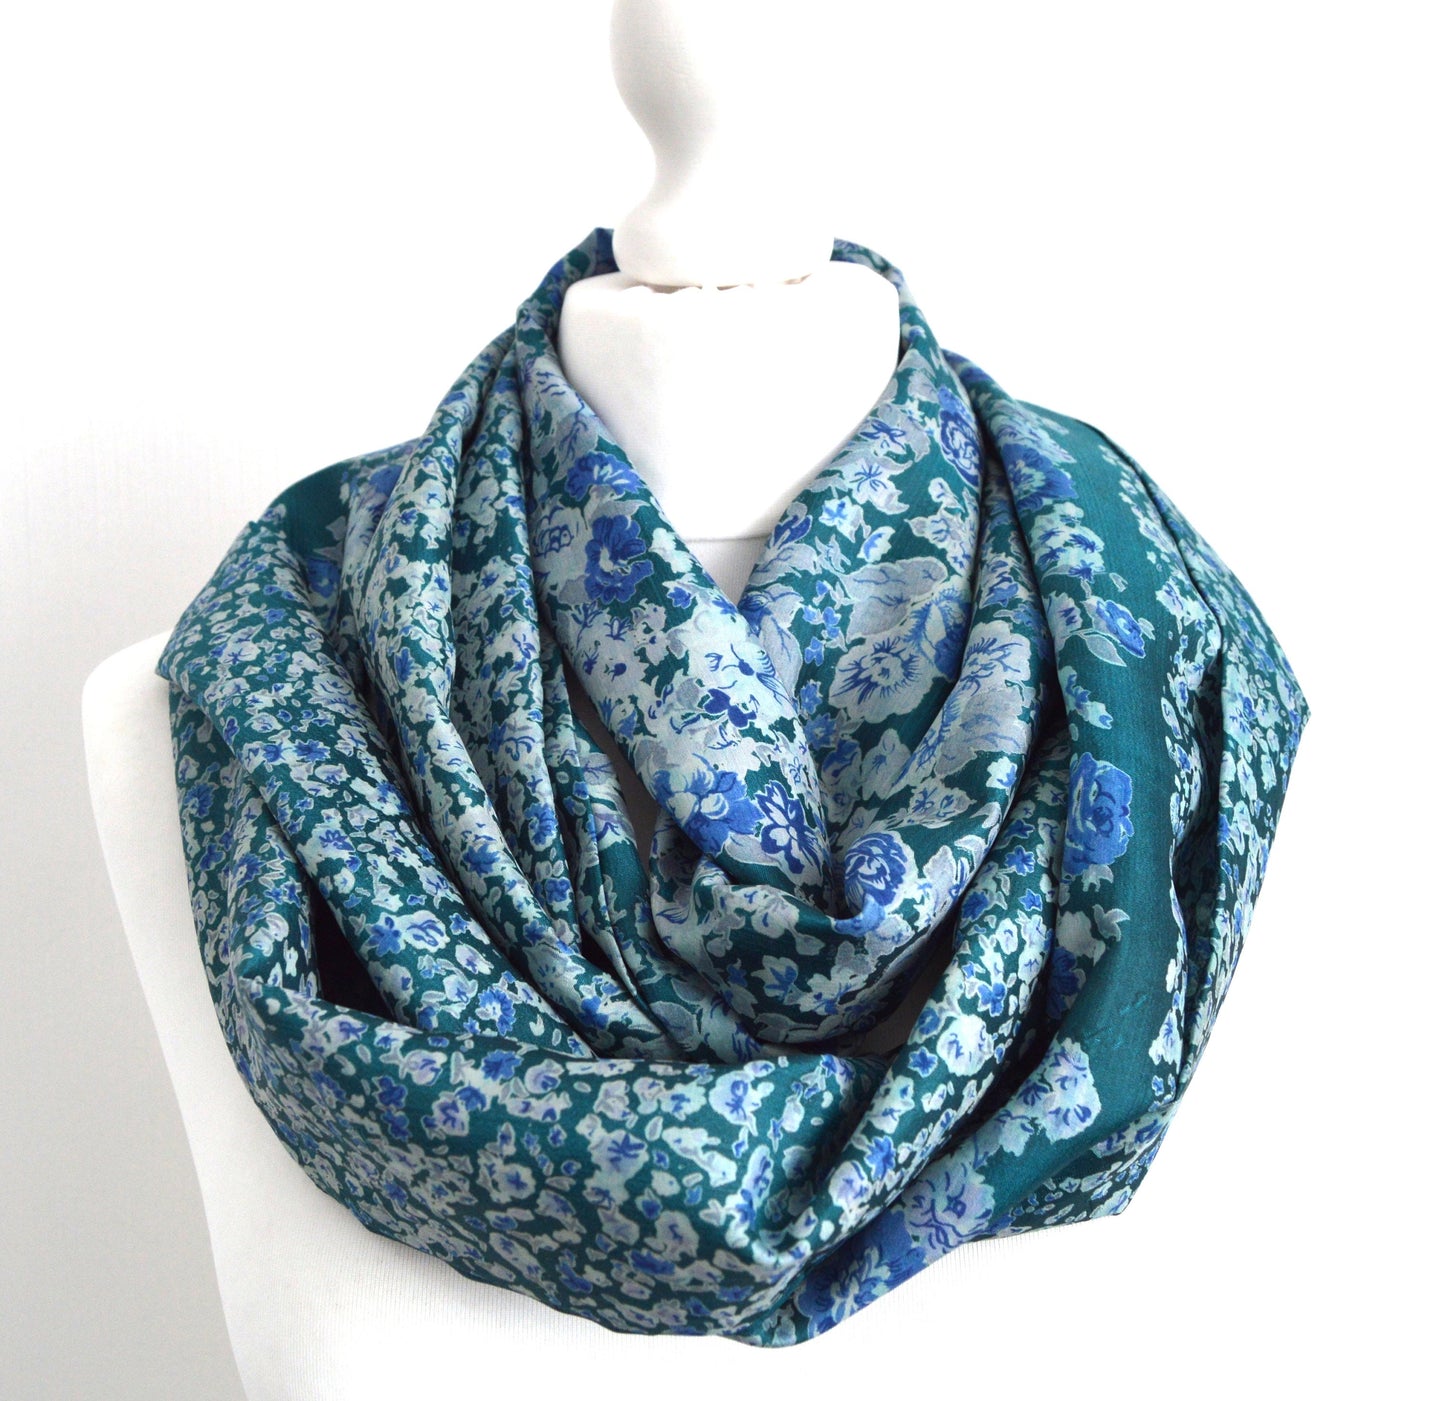 Teal Green Blue Floral Upcycled Vintage Sari Silk Scarf - Eco Friendly Bohemian Spring Summer Womens Scarf - Teacher Mum Mom Sister Gift